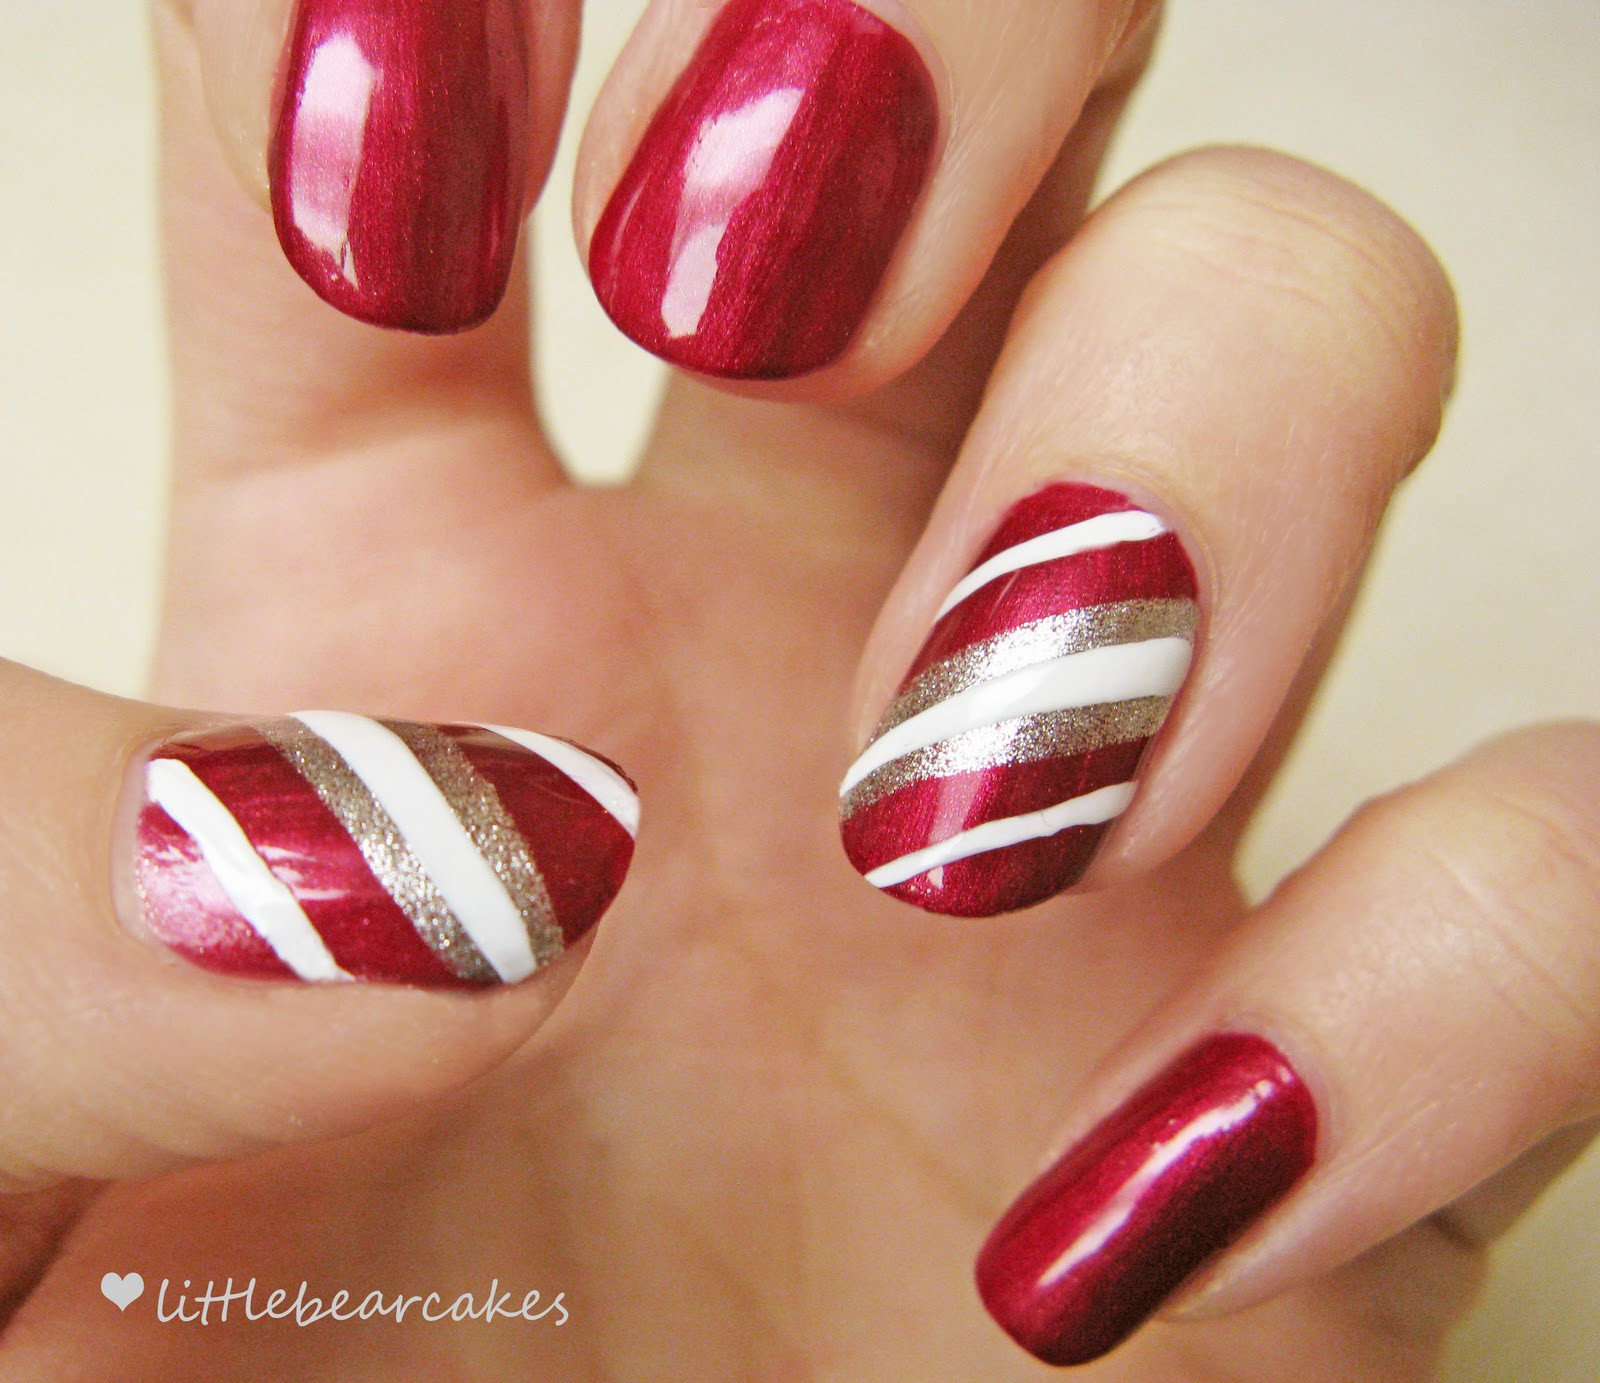 Candy Cane Nail Art
 Nails Candy Cane – Done well these can be the icing on